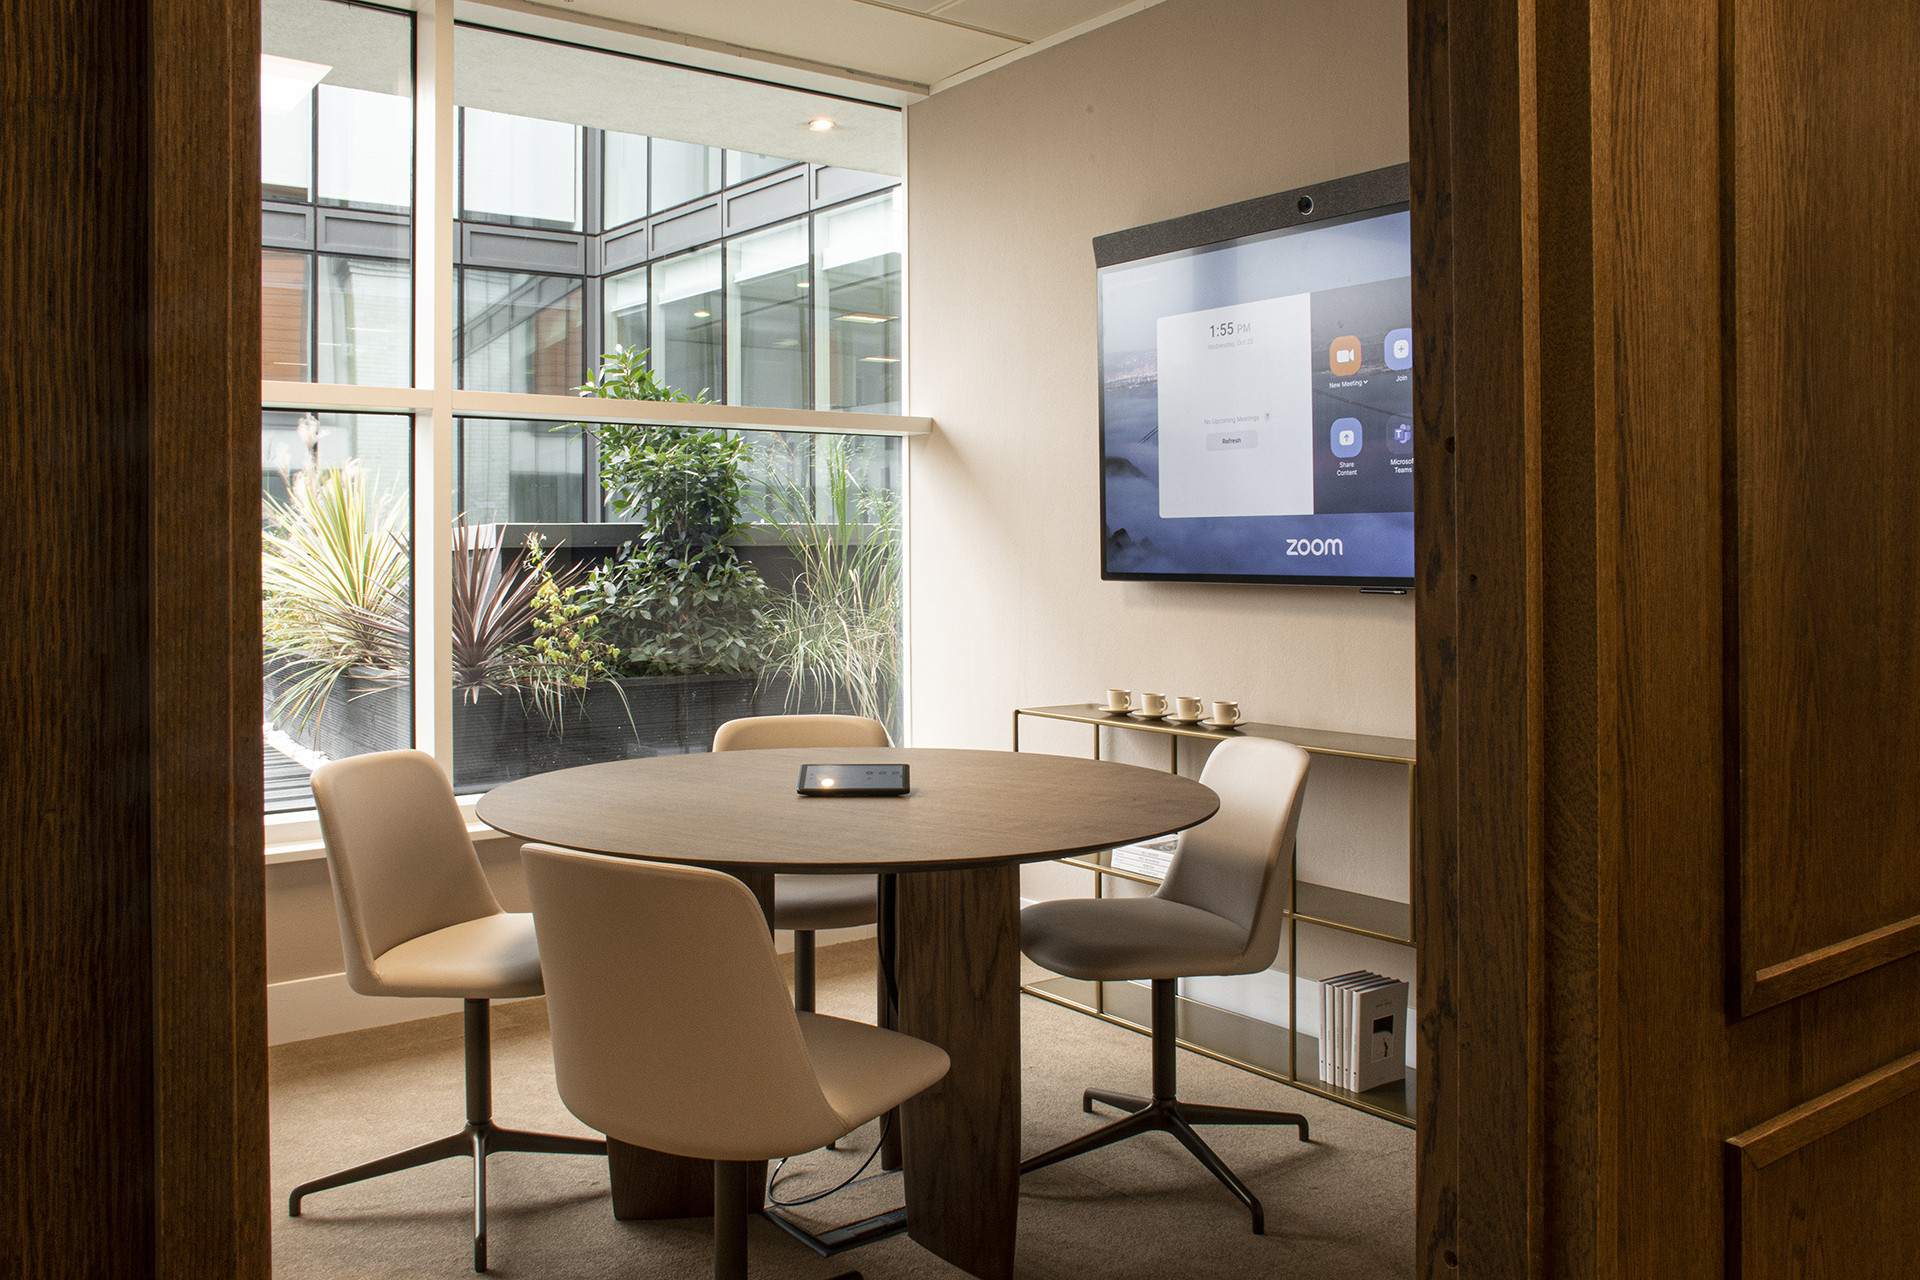 Tateside and Halkin have partnered to improve meeting room experiences at their King William Street offices. They deployed Lightware's Taurus UCX switchers, enabling seamless connectivity, 4K video, audio, and room automation. The integration also included a Shure audio solution.